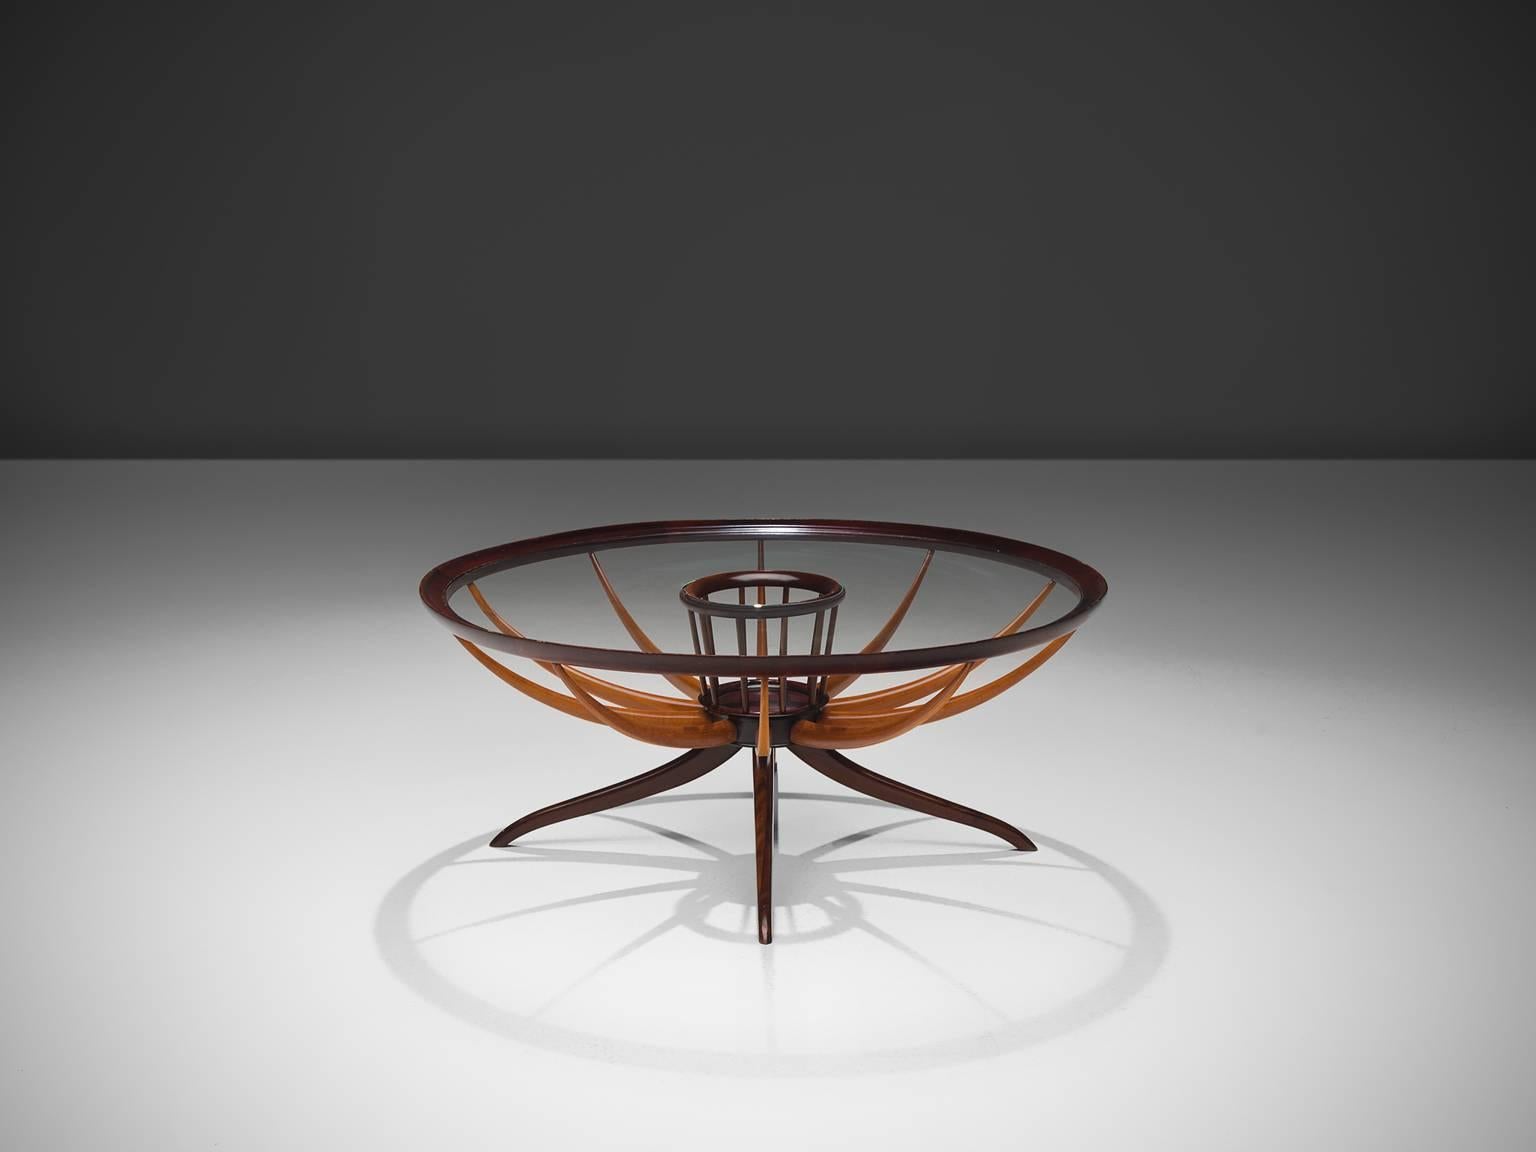 Giuseppi Scapinelli, side table, caviuana and glass, Italy, 1950s

This delicate round side table is designed by the Brazilian designer Scapinelli. The table features delicate organic wooden 'beams' that flow from the middle towards the bottom and